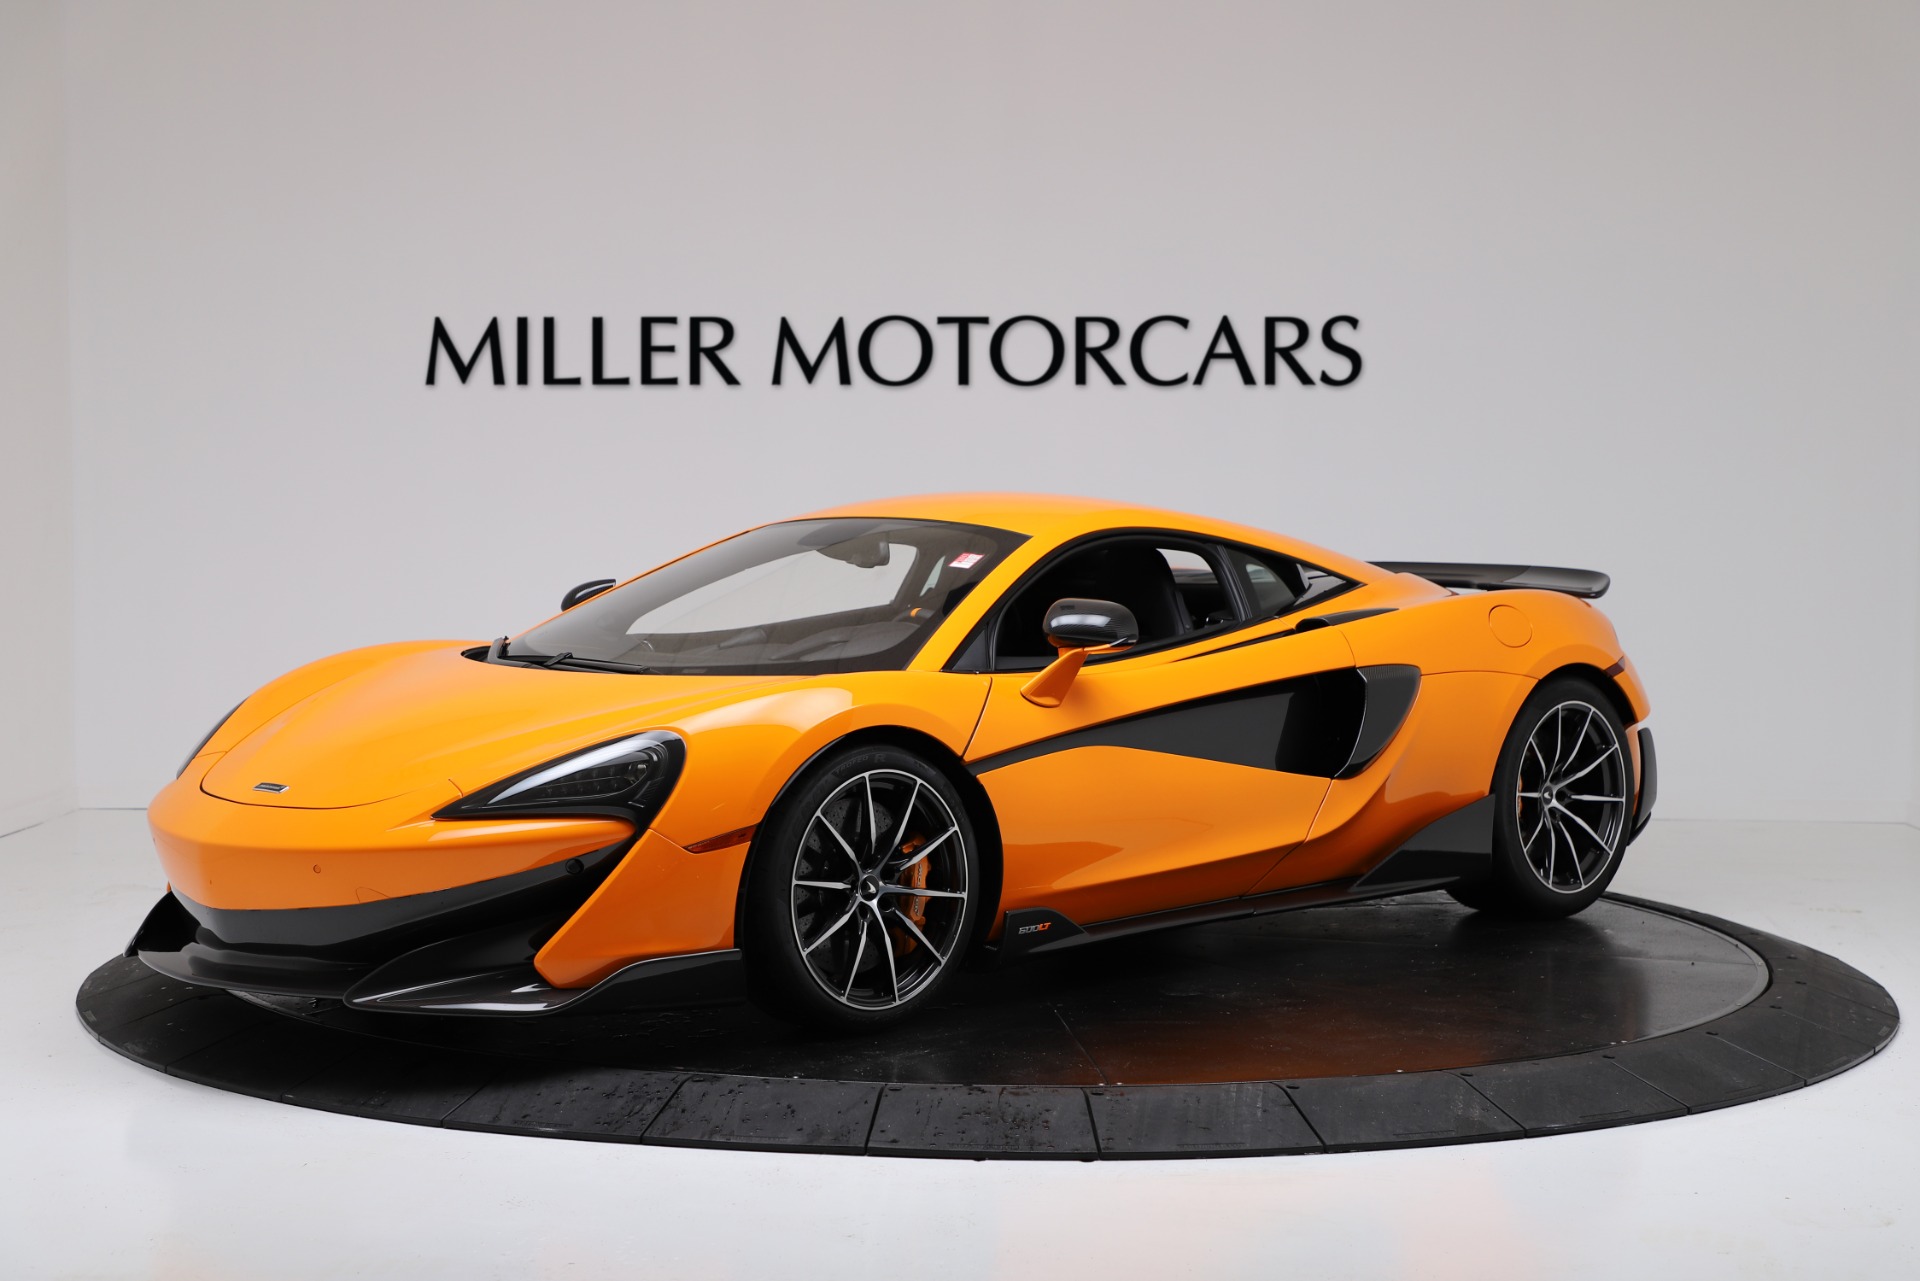 New 2019 McLaren 600LT Coupe for sale Sold at Maserati of Greenwich in Greenwich CT 06830 1